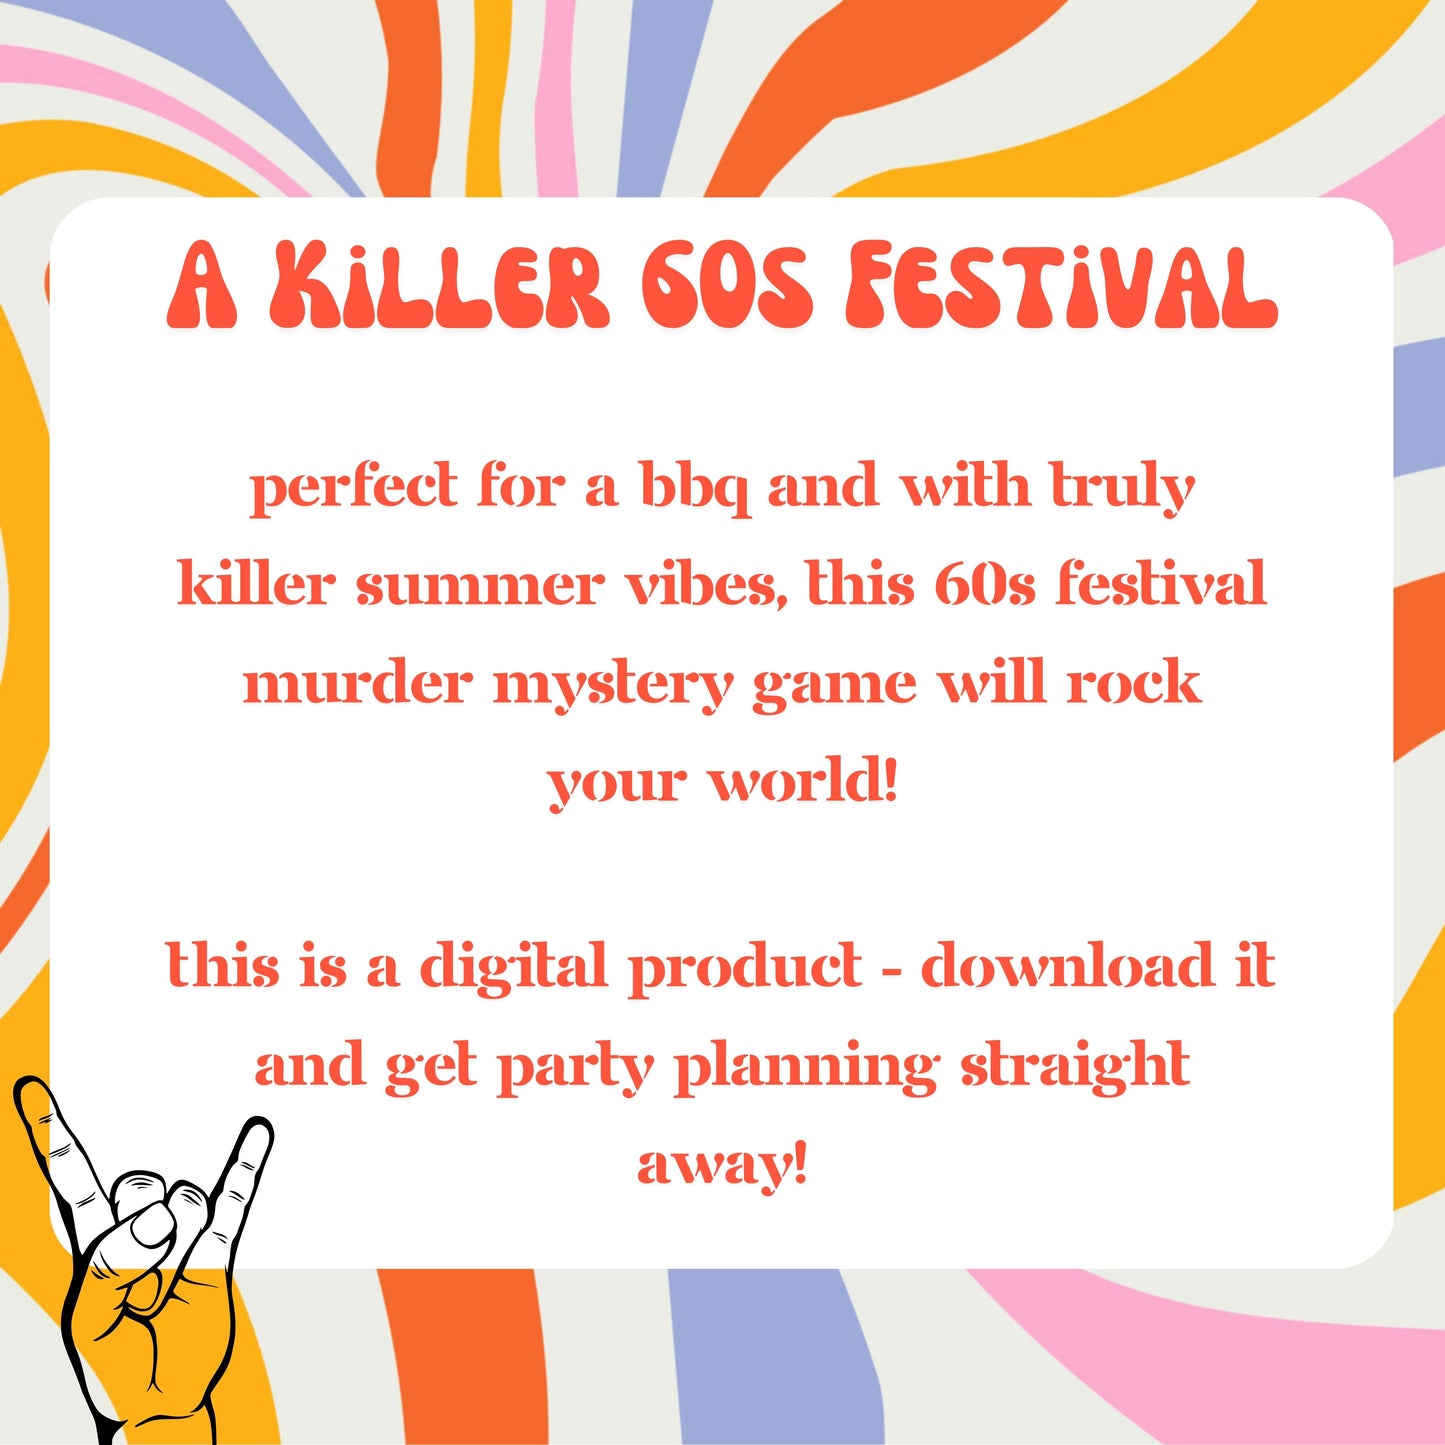 A Killer 60s Festival! A 60s Music Festival themed Murder Mystery Game for 10-20 Players